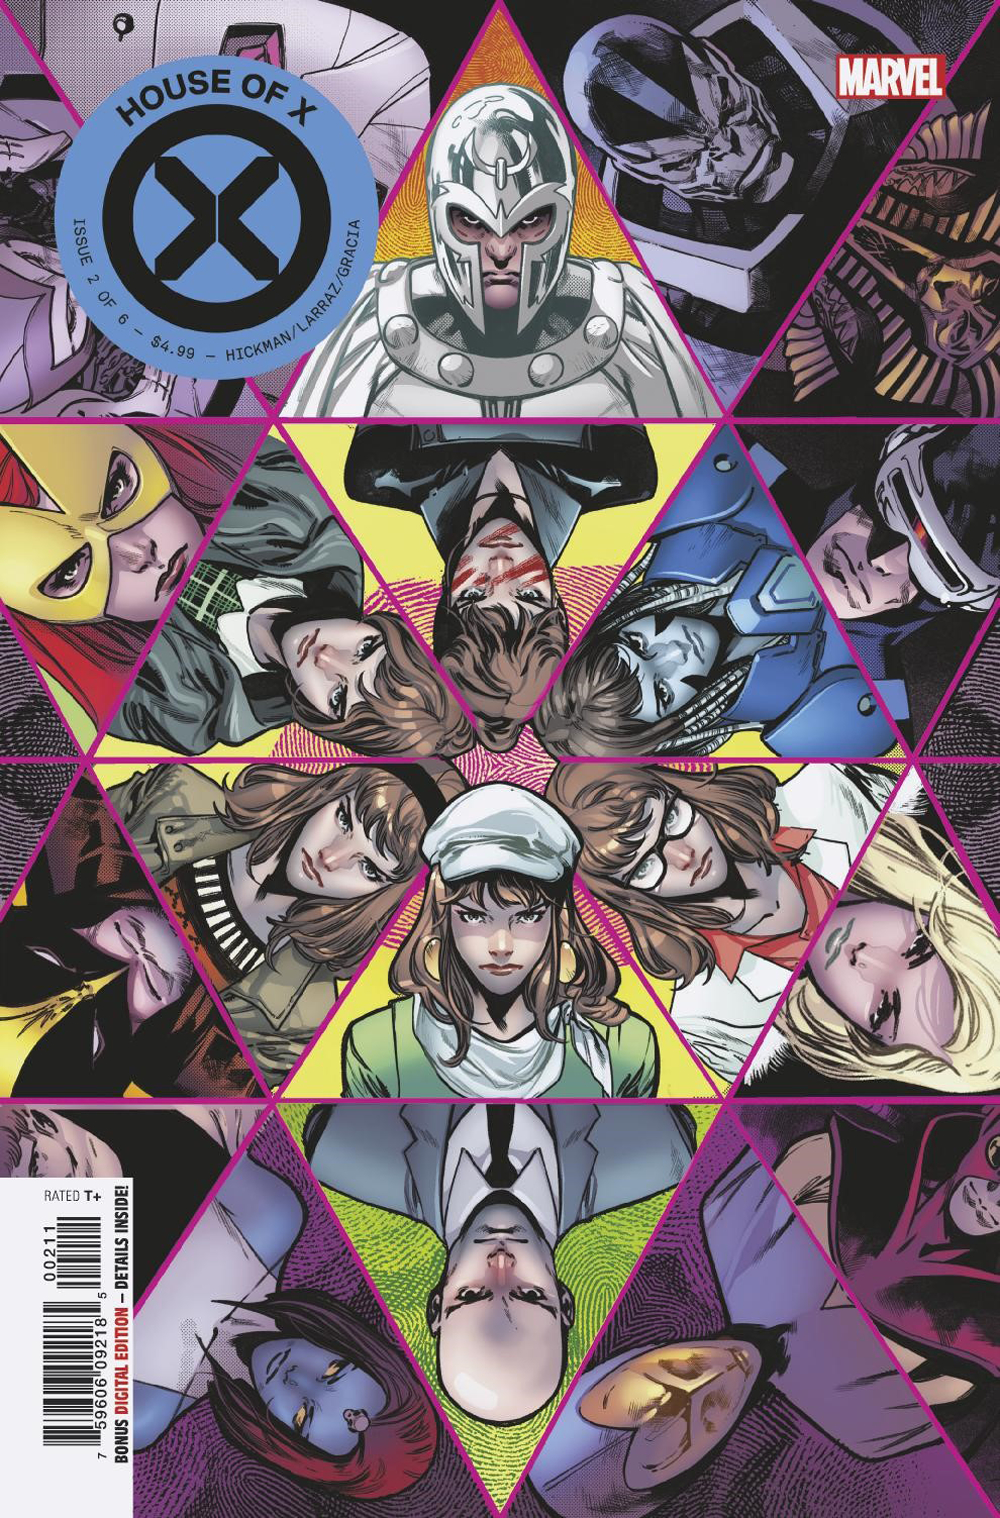 House of X no. 2 (2019 Series)